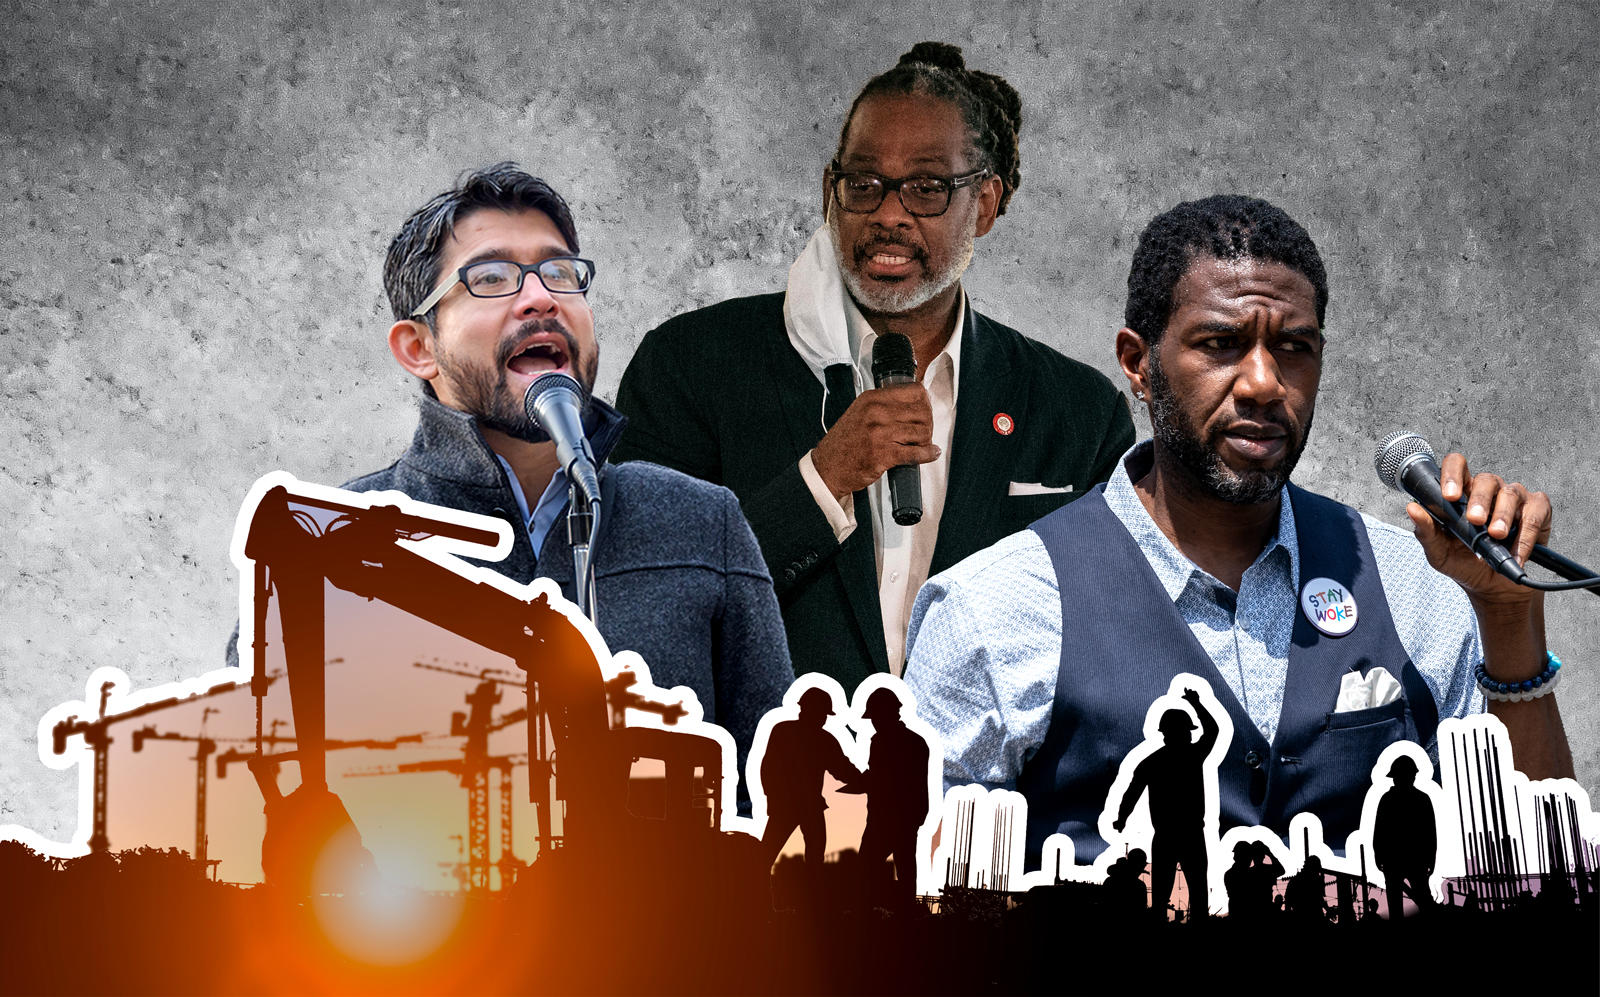 City Council members Carlos Menchaca and Robert Cornegy with Public Advocate Jumaane Williams (Getty, iStock)